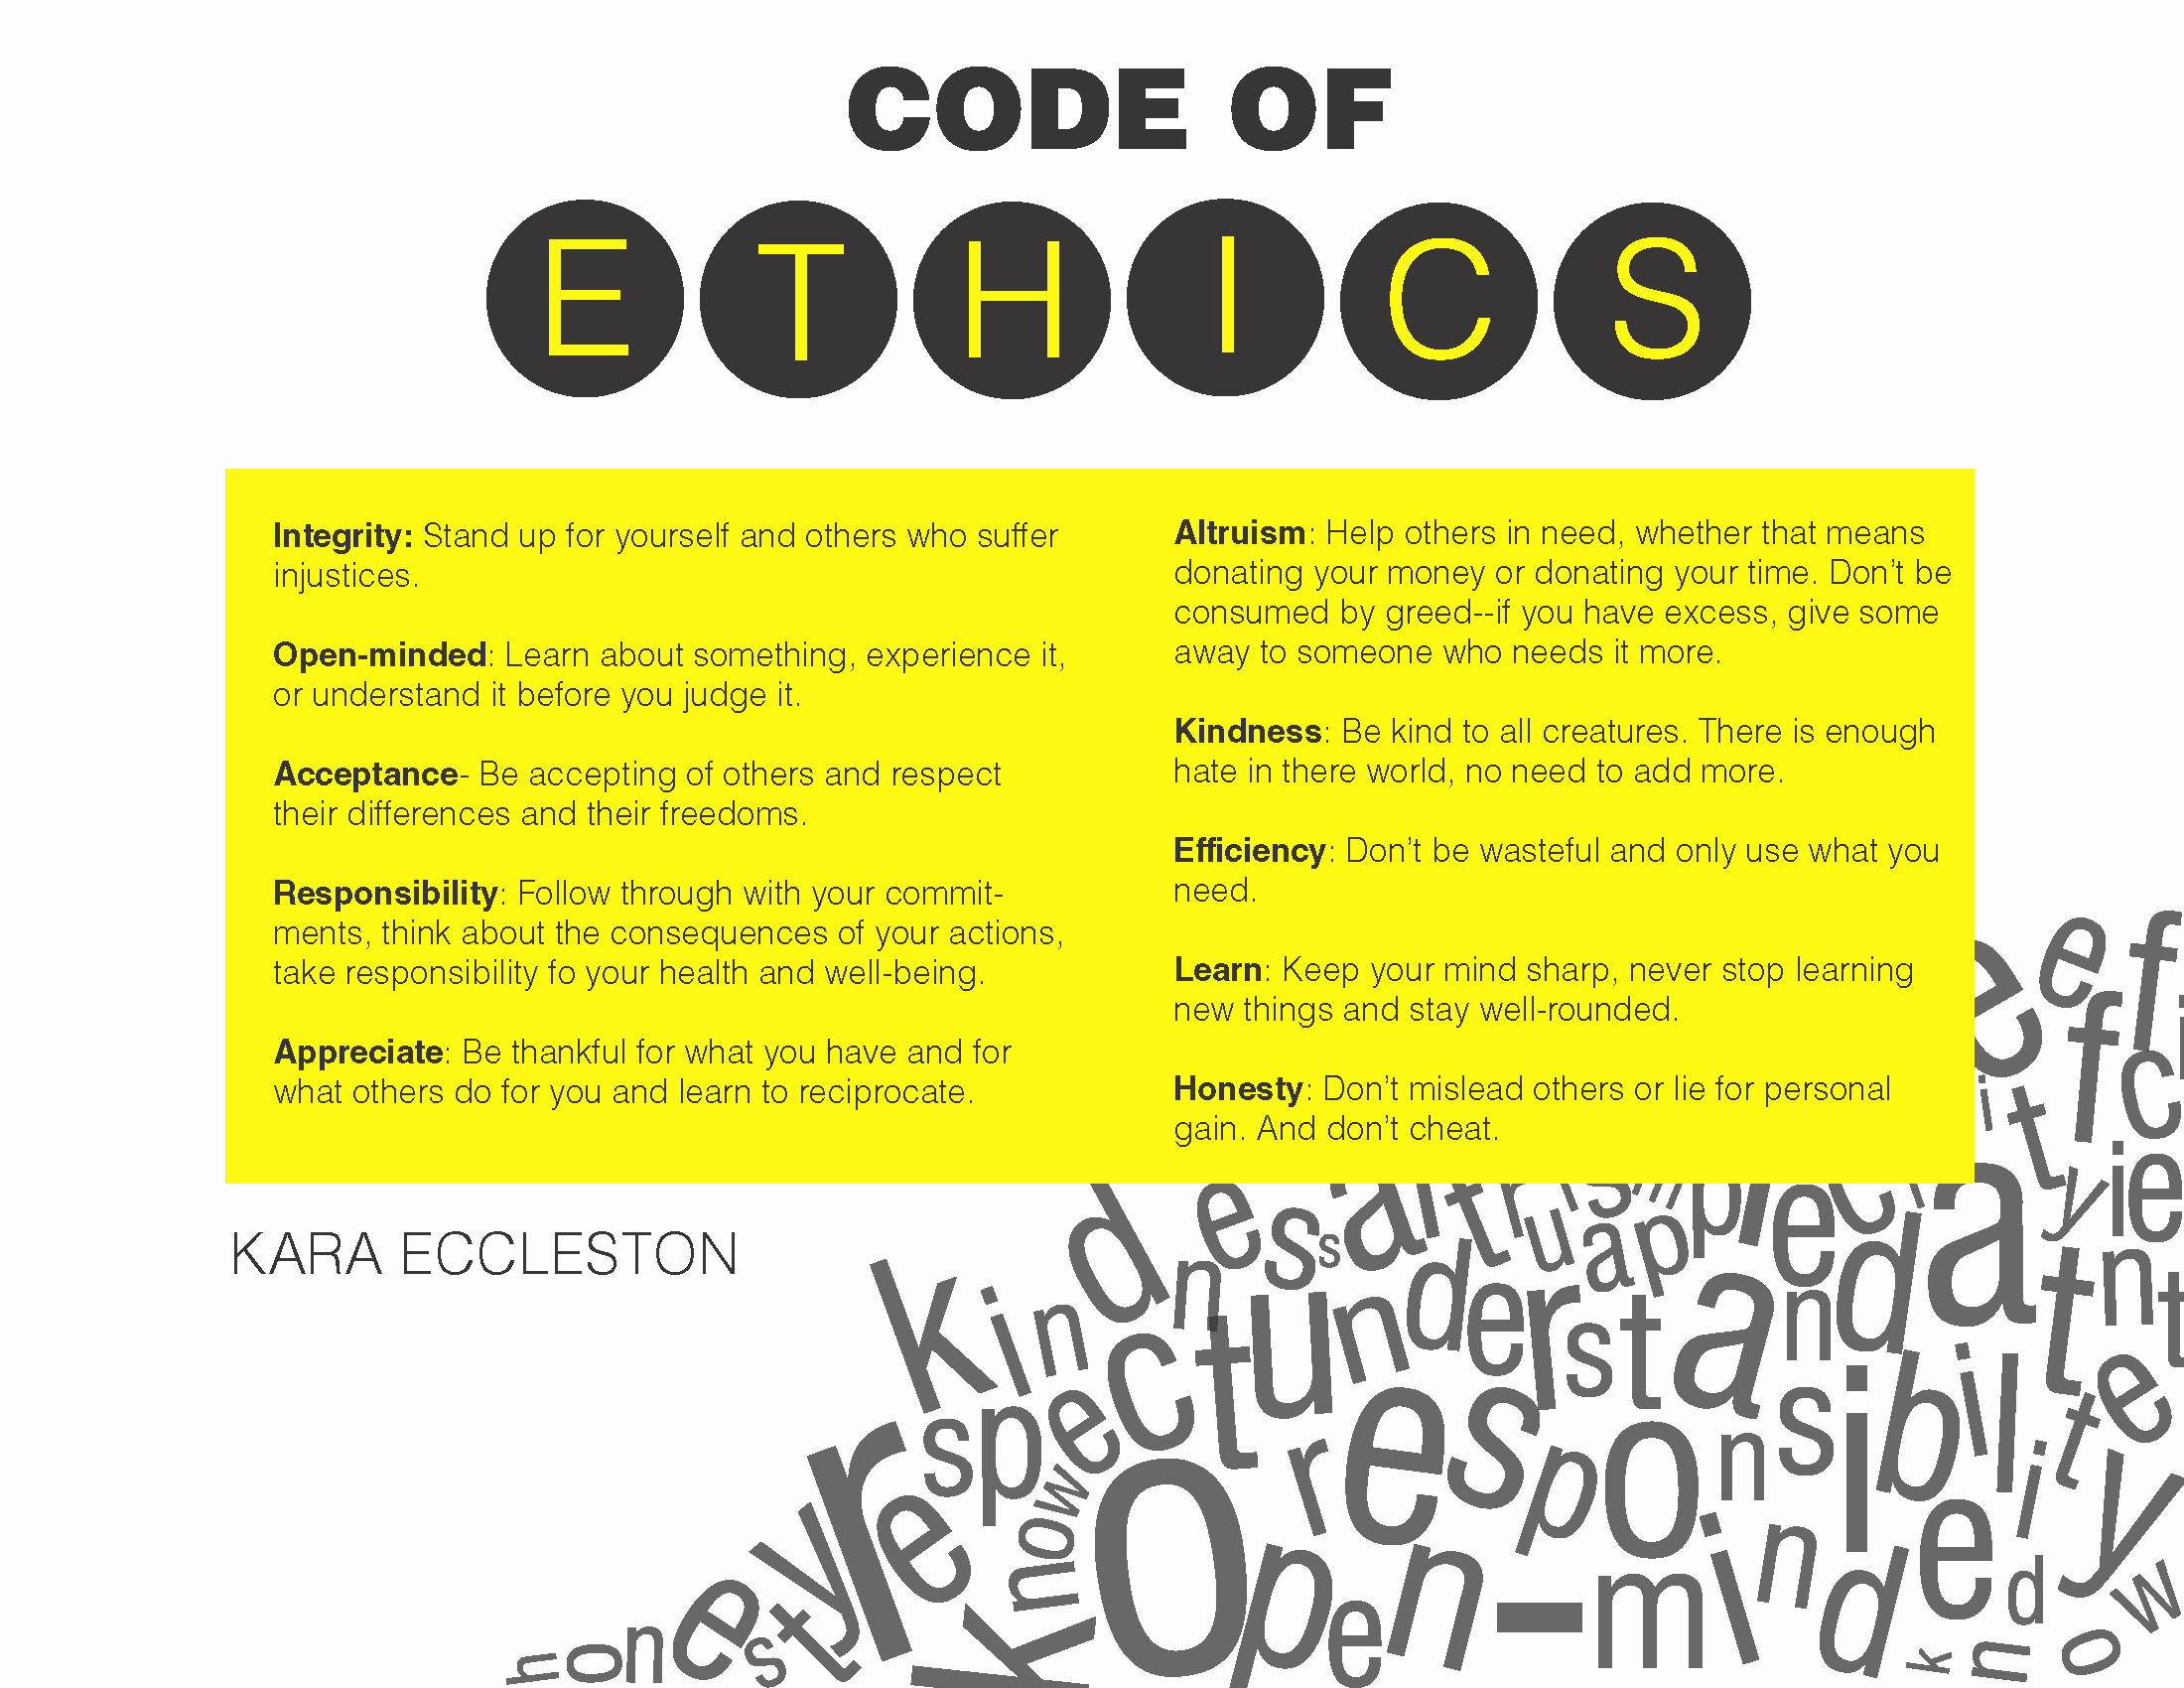 This List Of Ethics Can Be Applied to Everyone and Not